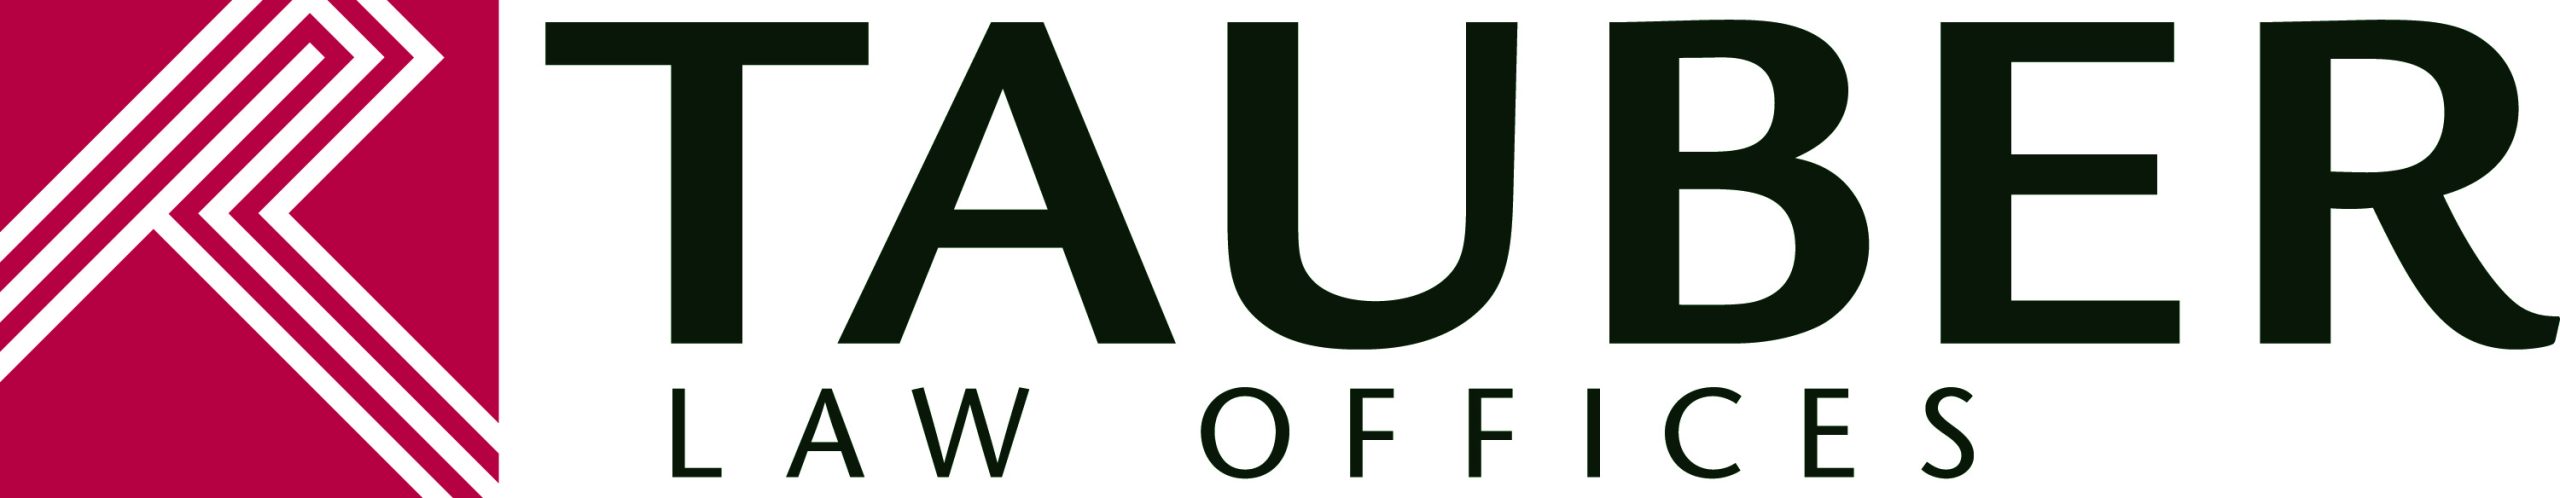 Tauber logo color firm name